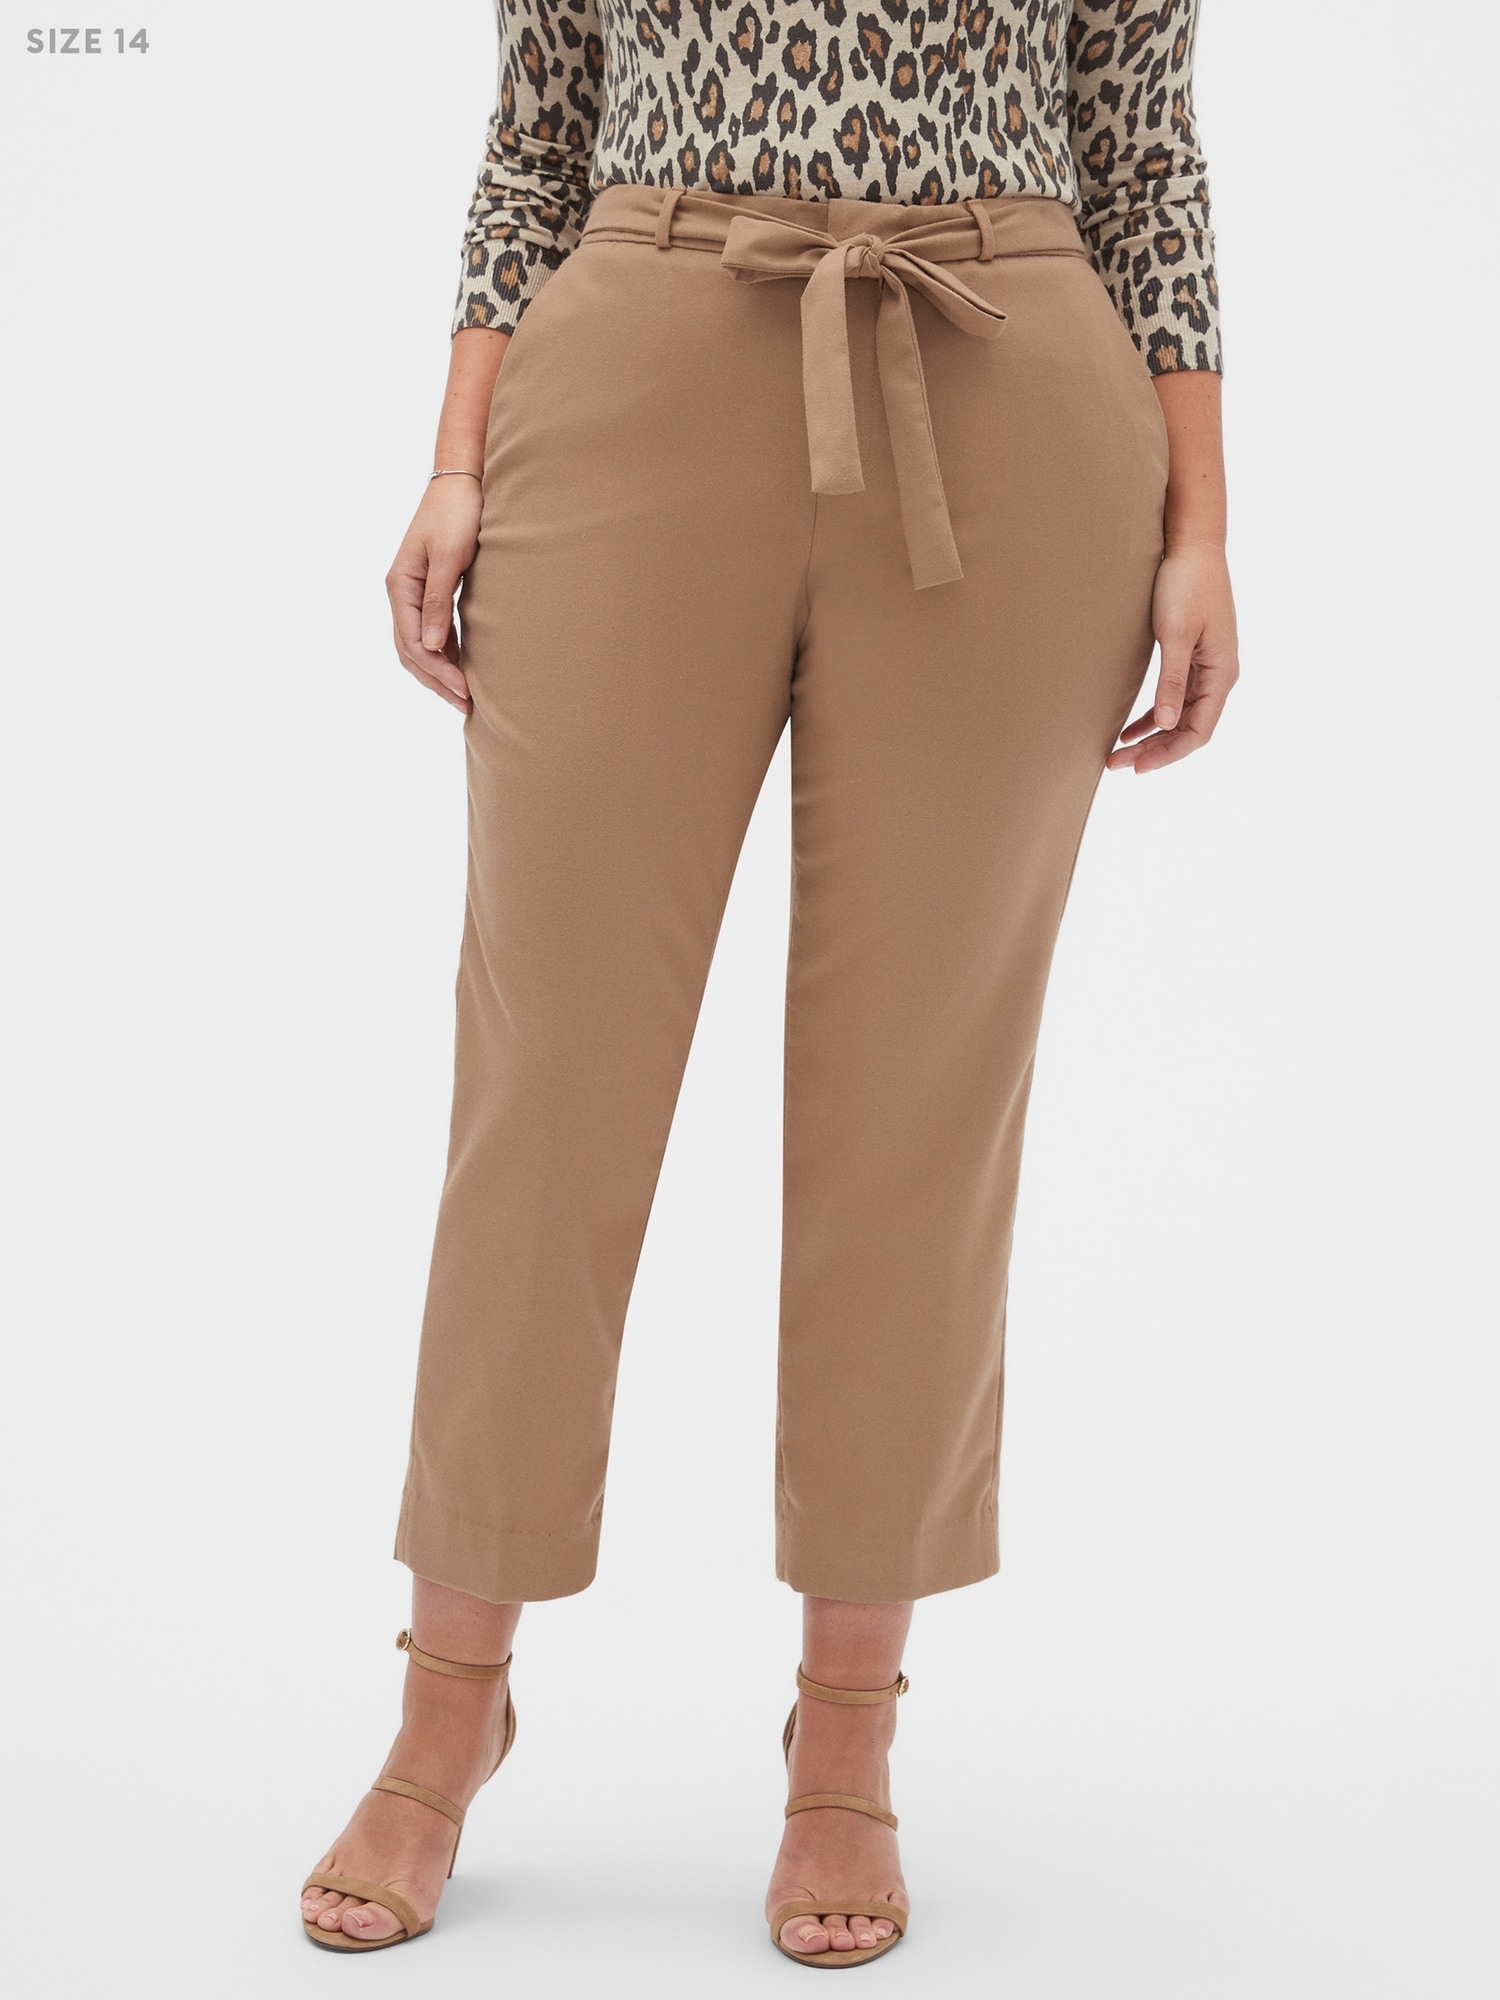 Avery Tie-Waist Brushed Twill Tailored Ankle Pant